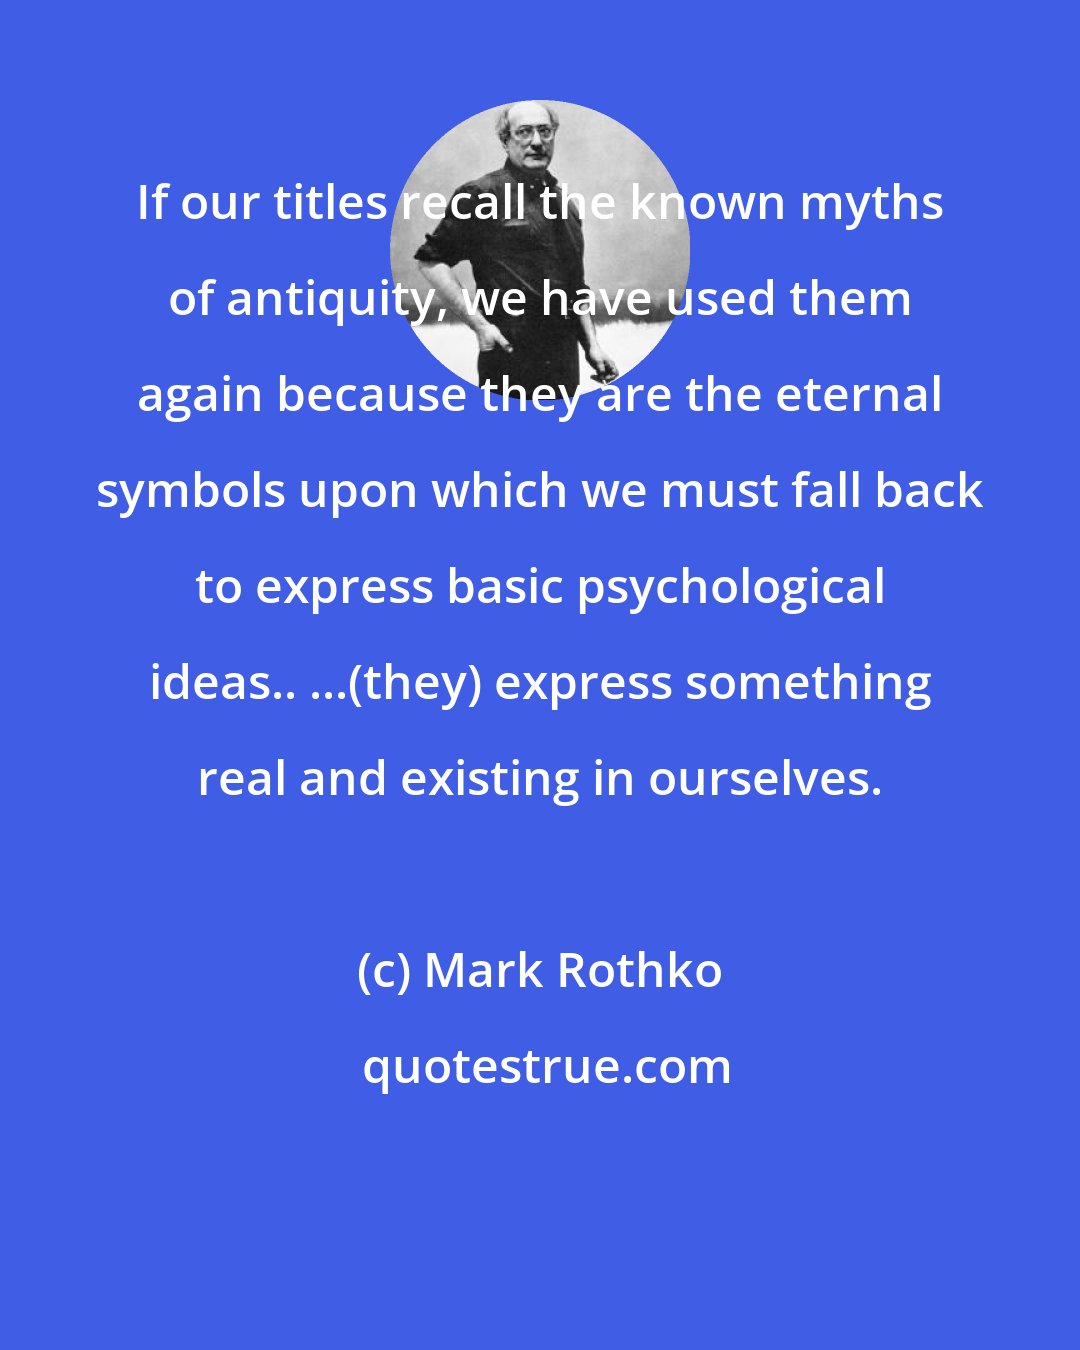 Mark Rothko: If our titles recall the known myths of antiquity, we have used them again because they are the eternal symbols upon which we must fall back to express basic psychological ideas.. ...(they) express something real and existing in ourselves.